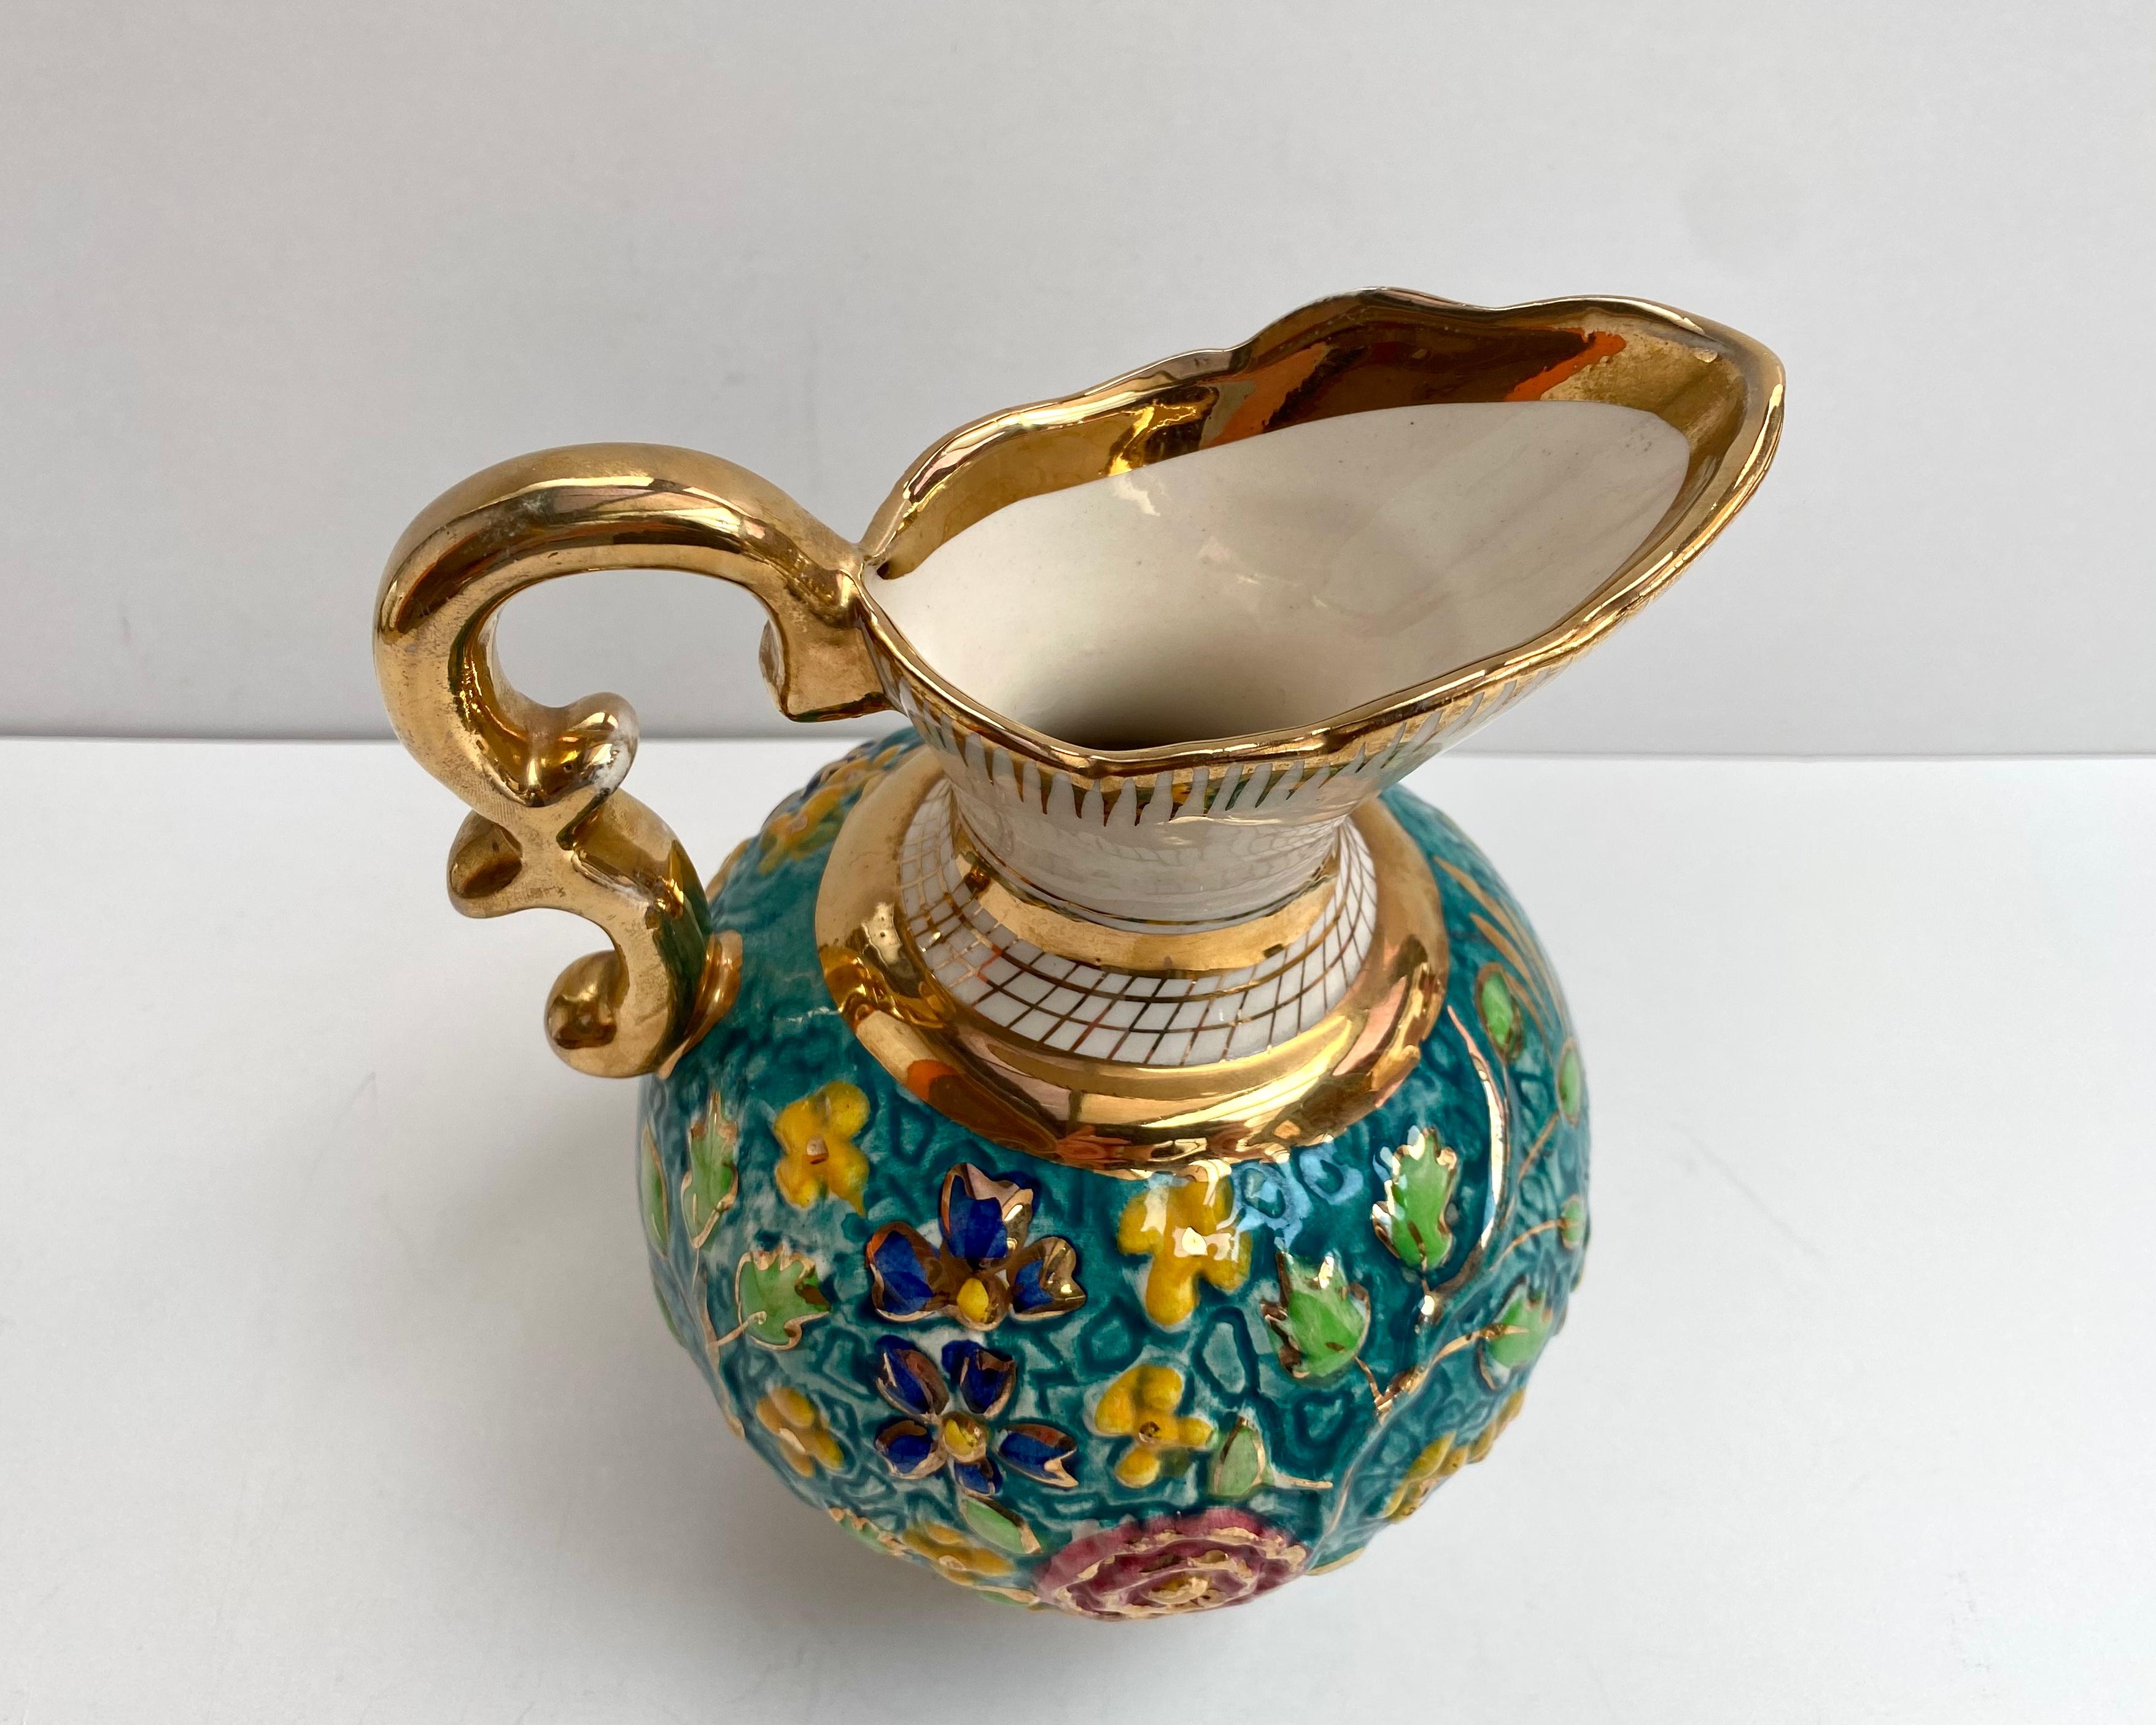 Vintage, hand painted ewer.

Gorgeous faience pitcher vase with a beautifull turquoise background decorated with a bright raised enamel and 24K gold pattern of a colorful flowers.

Belgium. 1950s.

All hand crafted and hand painted. All accents in